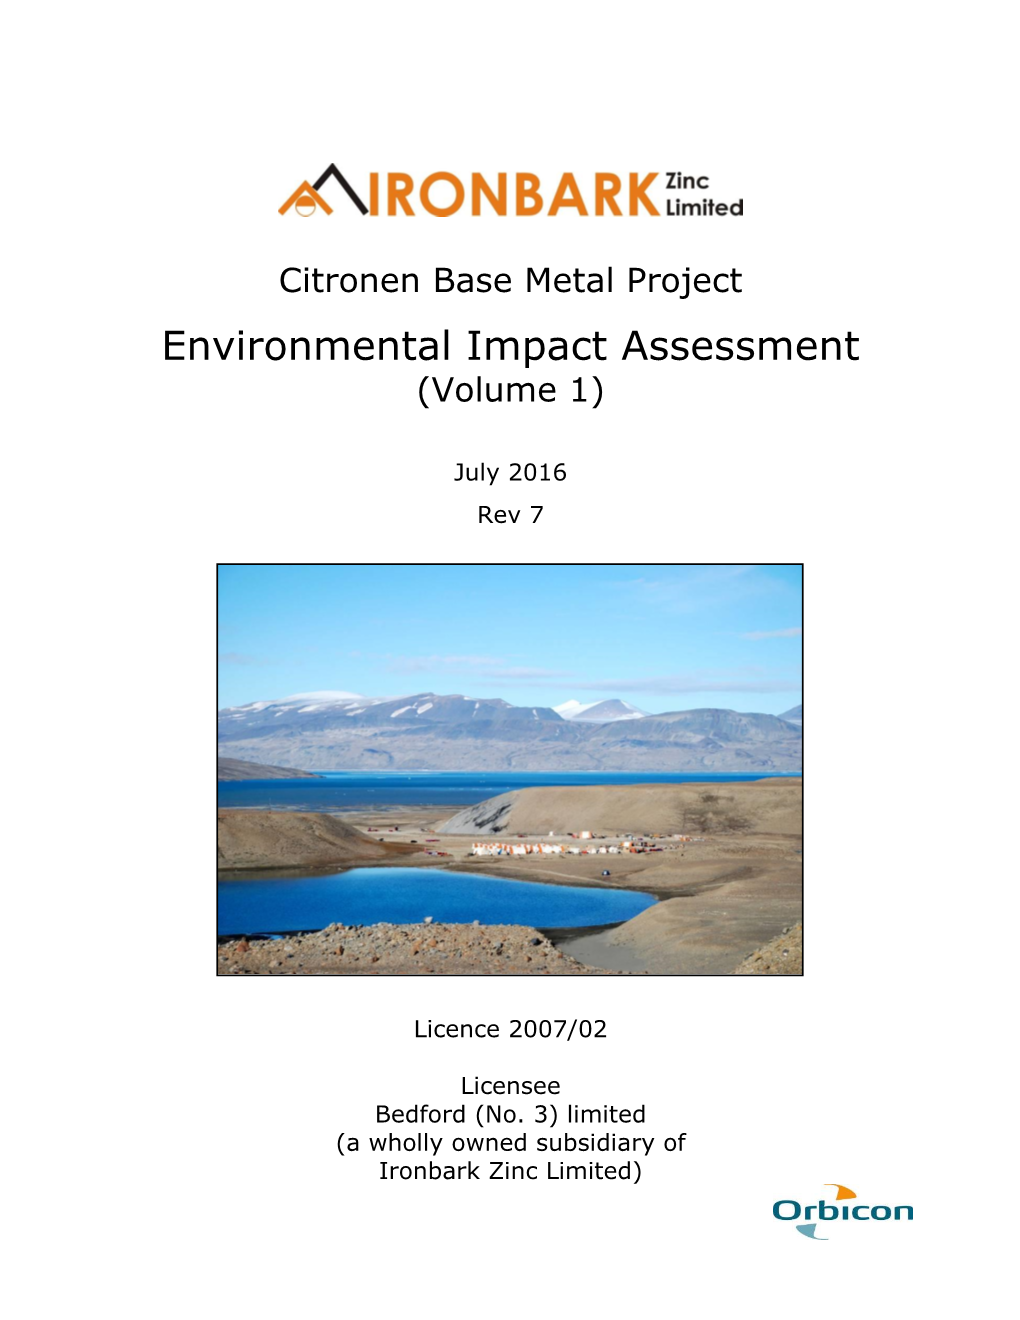 Environmental Impact Assessment of the Citronen Zinc Project, North